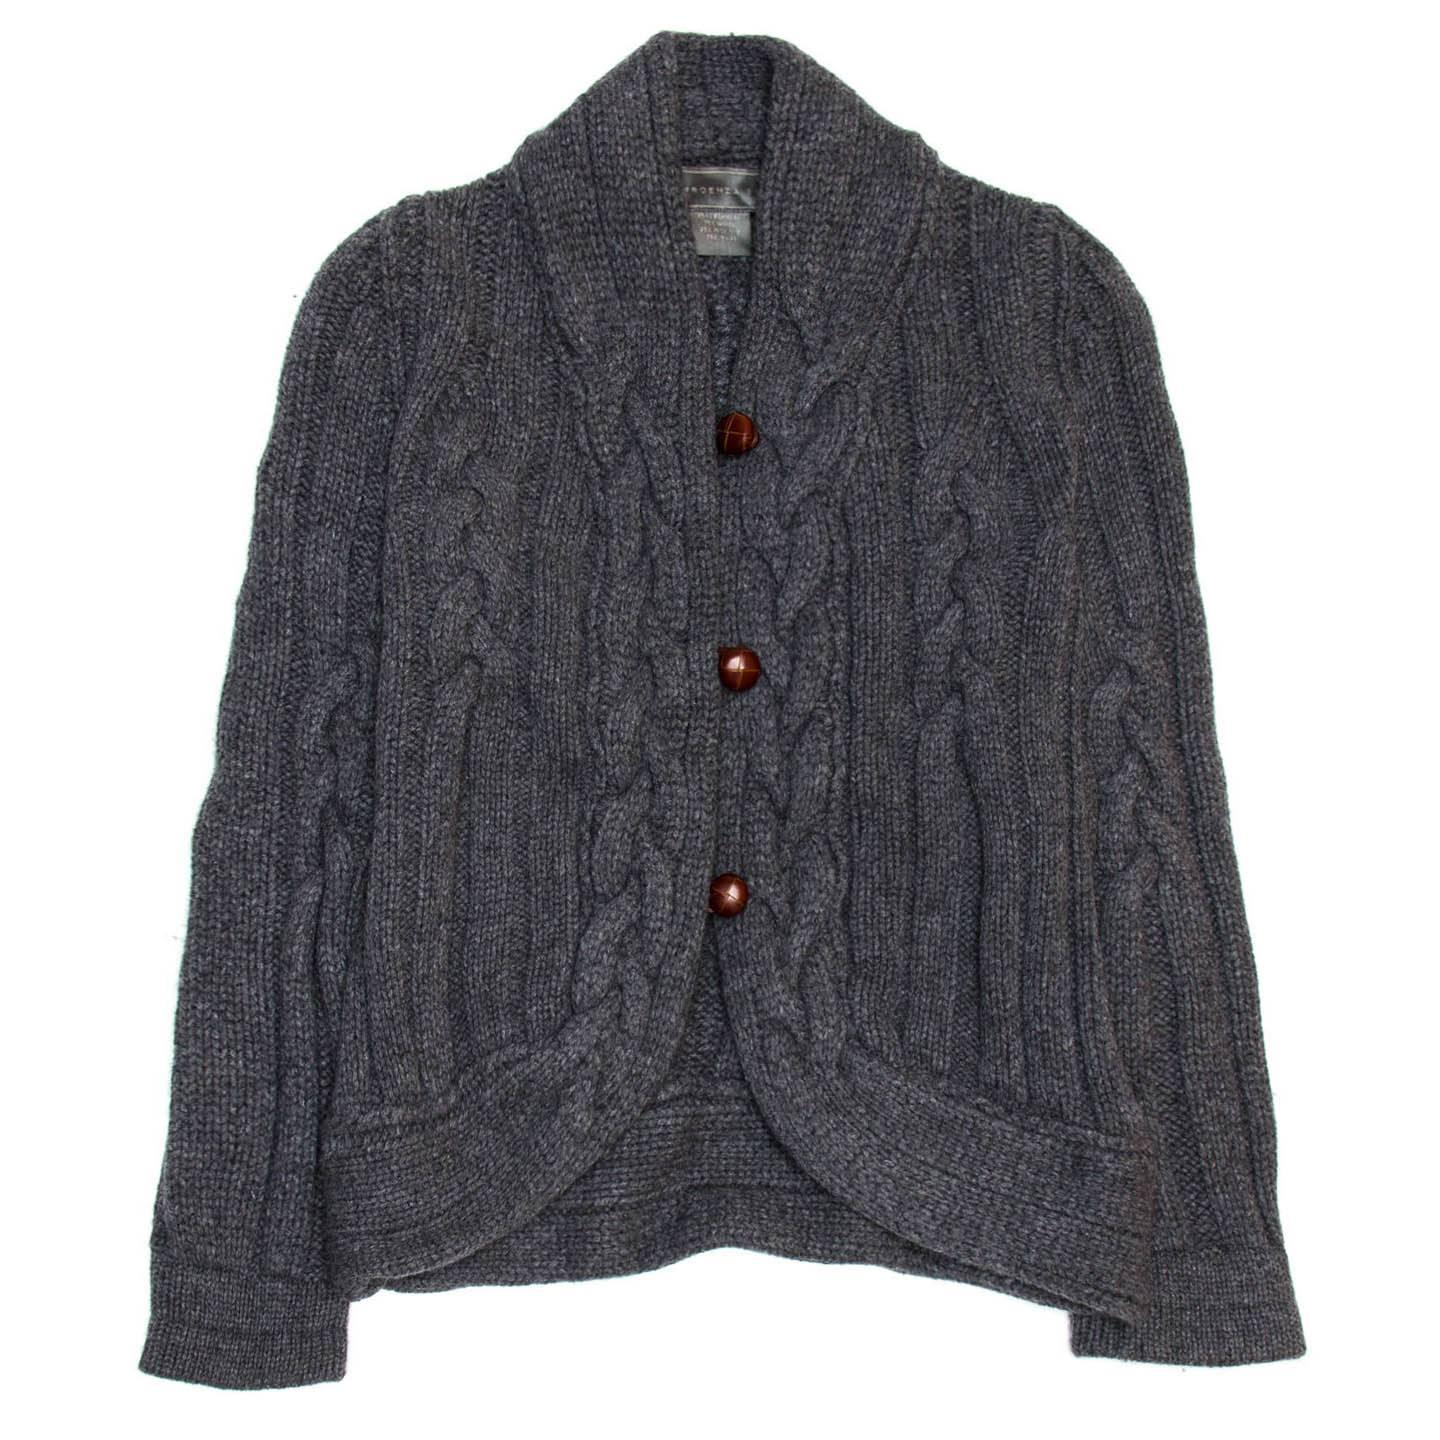 Proenza Schouler grey cable knit waist length cardigan with shawl neck and brown leather buttons with an elegant loop closure.

Size  L Universal sizing

Condition  Excellent: worn once